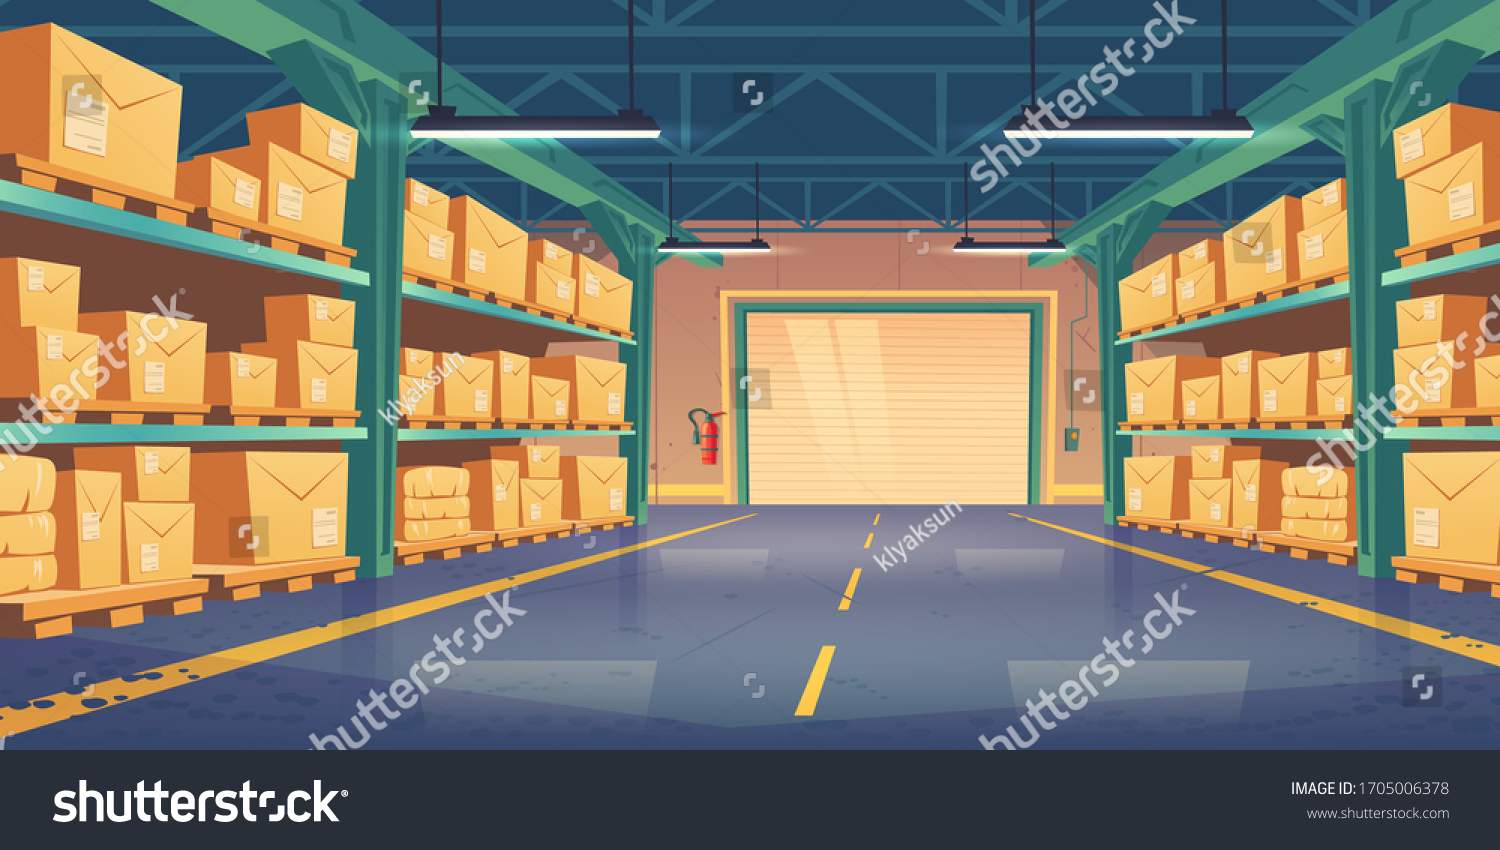 SVG of Warehouse interior, logistics, cargo and goods delivery postal service. Storehouse with rolling shatter gates and racks with parcels boxes on palettes perspective view, Cartoon vector illustration svg